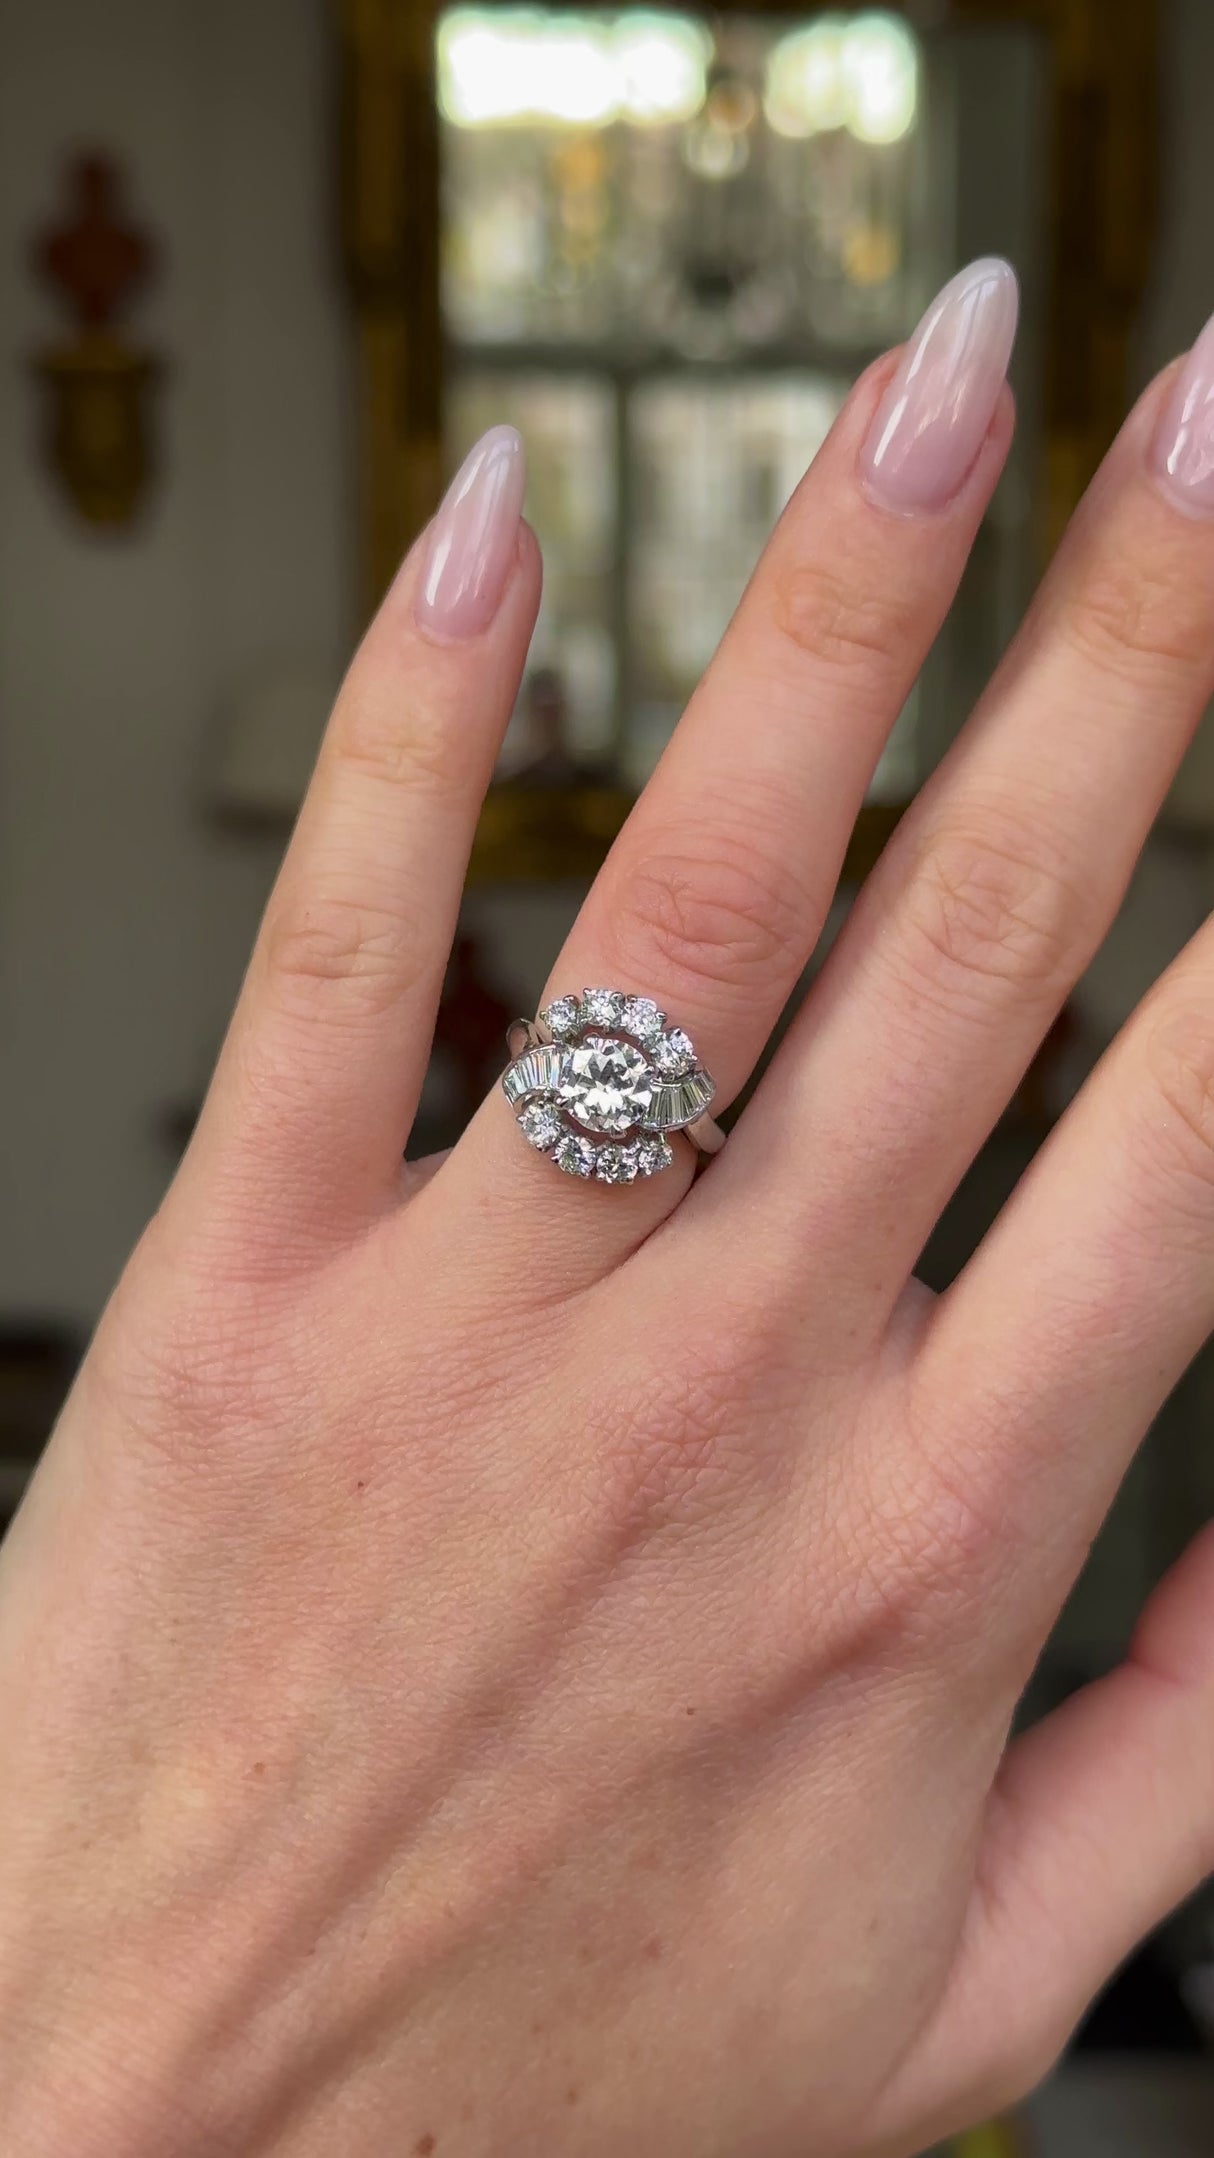 Cartier diamond engagement ring worn on hand and moved around to give perspective. 